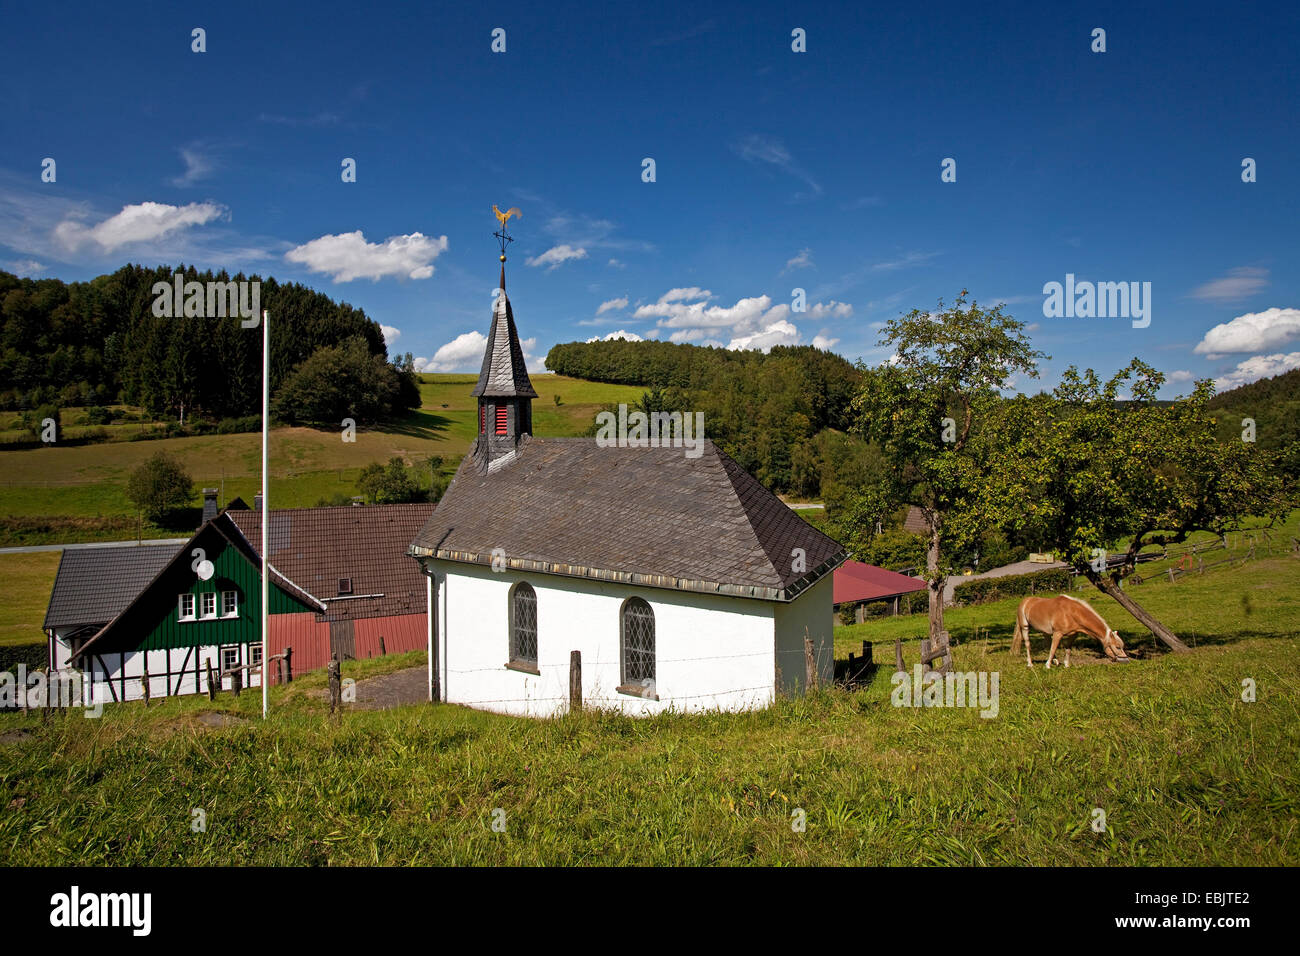 chapel and farmhouse in hill landscape with forest and meadows in the district Dumicke, Germany, North Rhine-Westphalia, Sauerland, Drolshagen Stock Photo